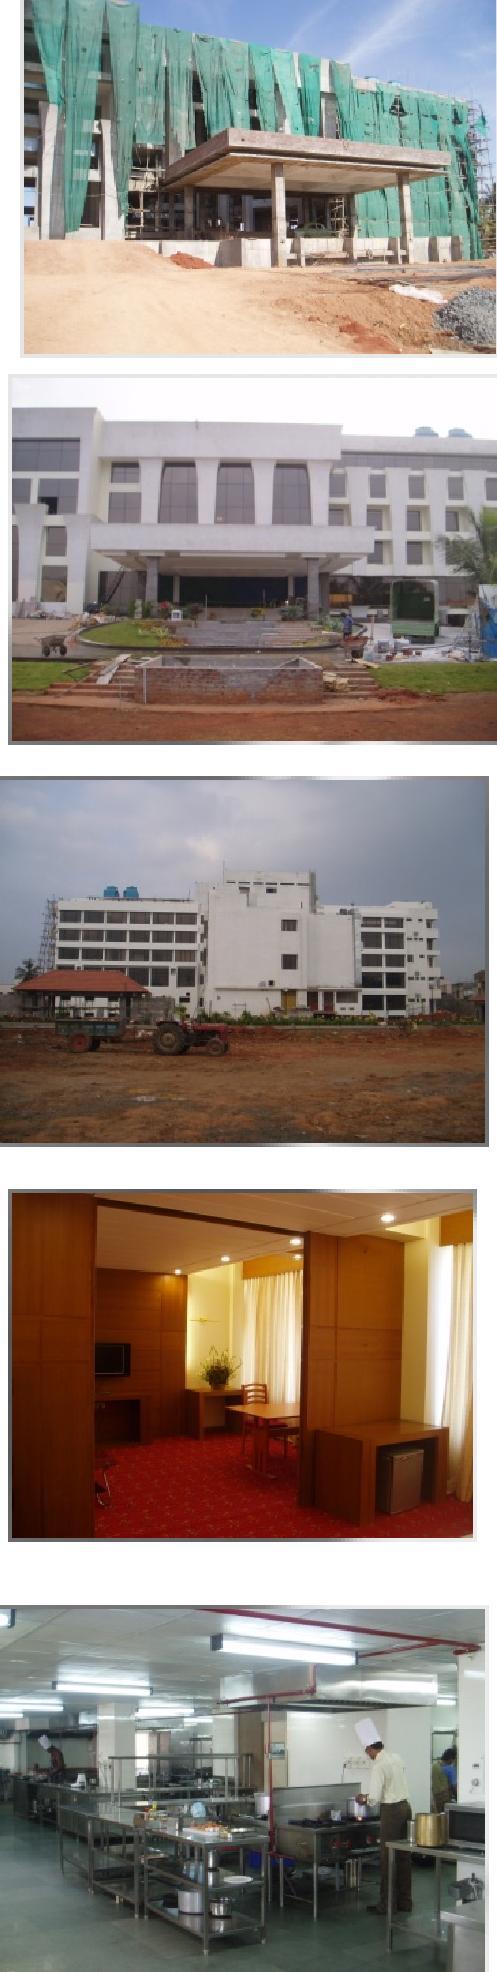 Applications Hotel Project Complete Operational Consulting for a 3 Star hotel Hotel Sunway, Pondicherry.